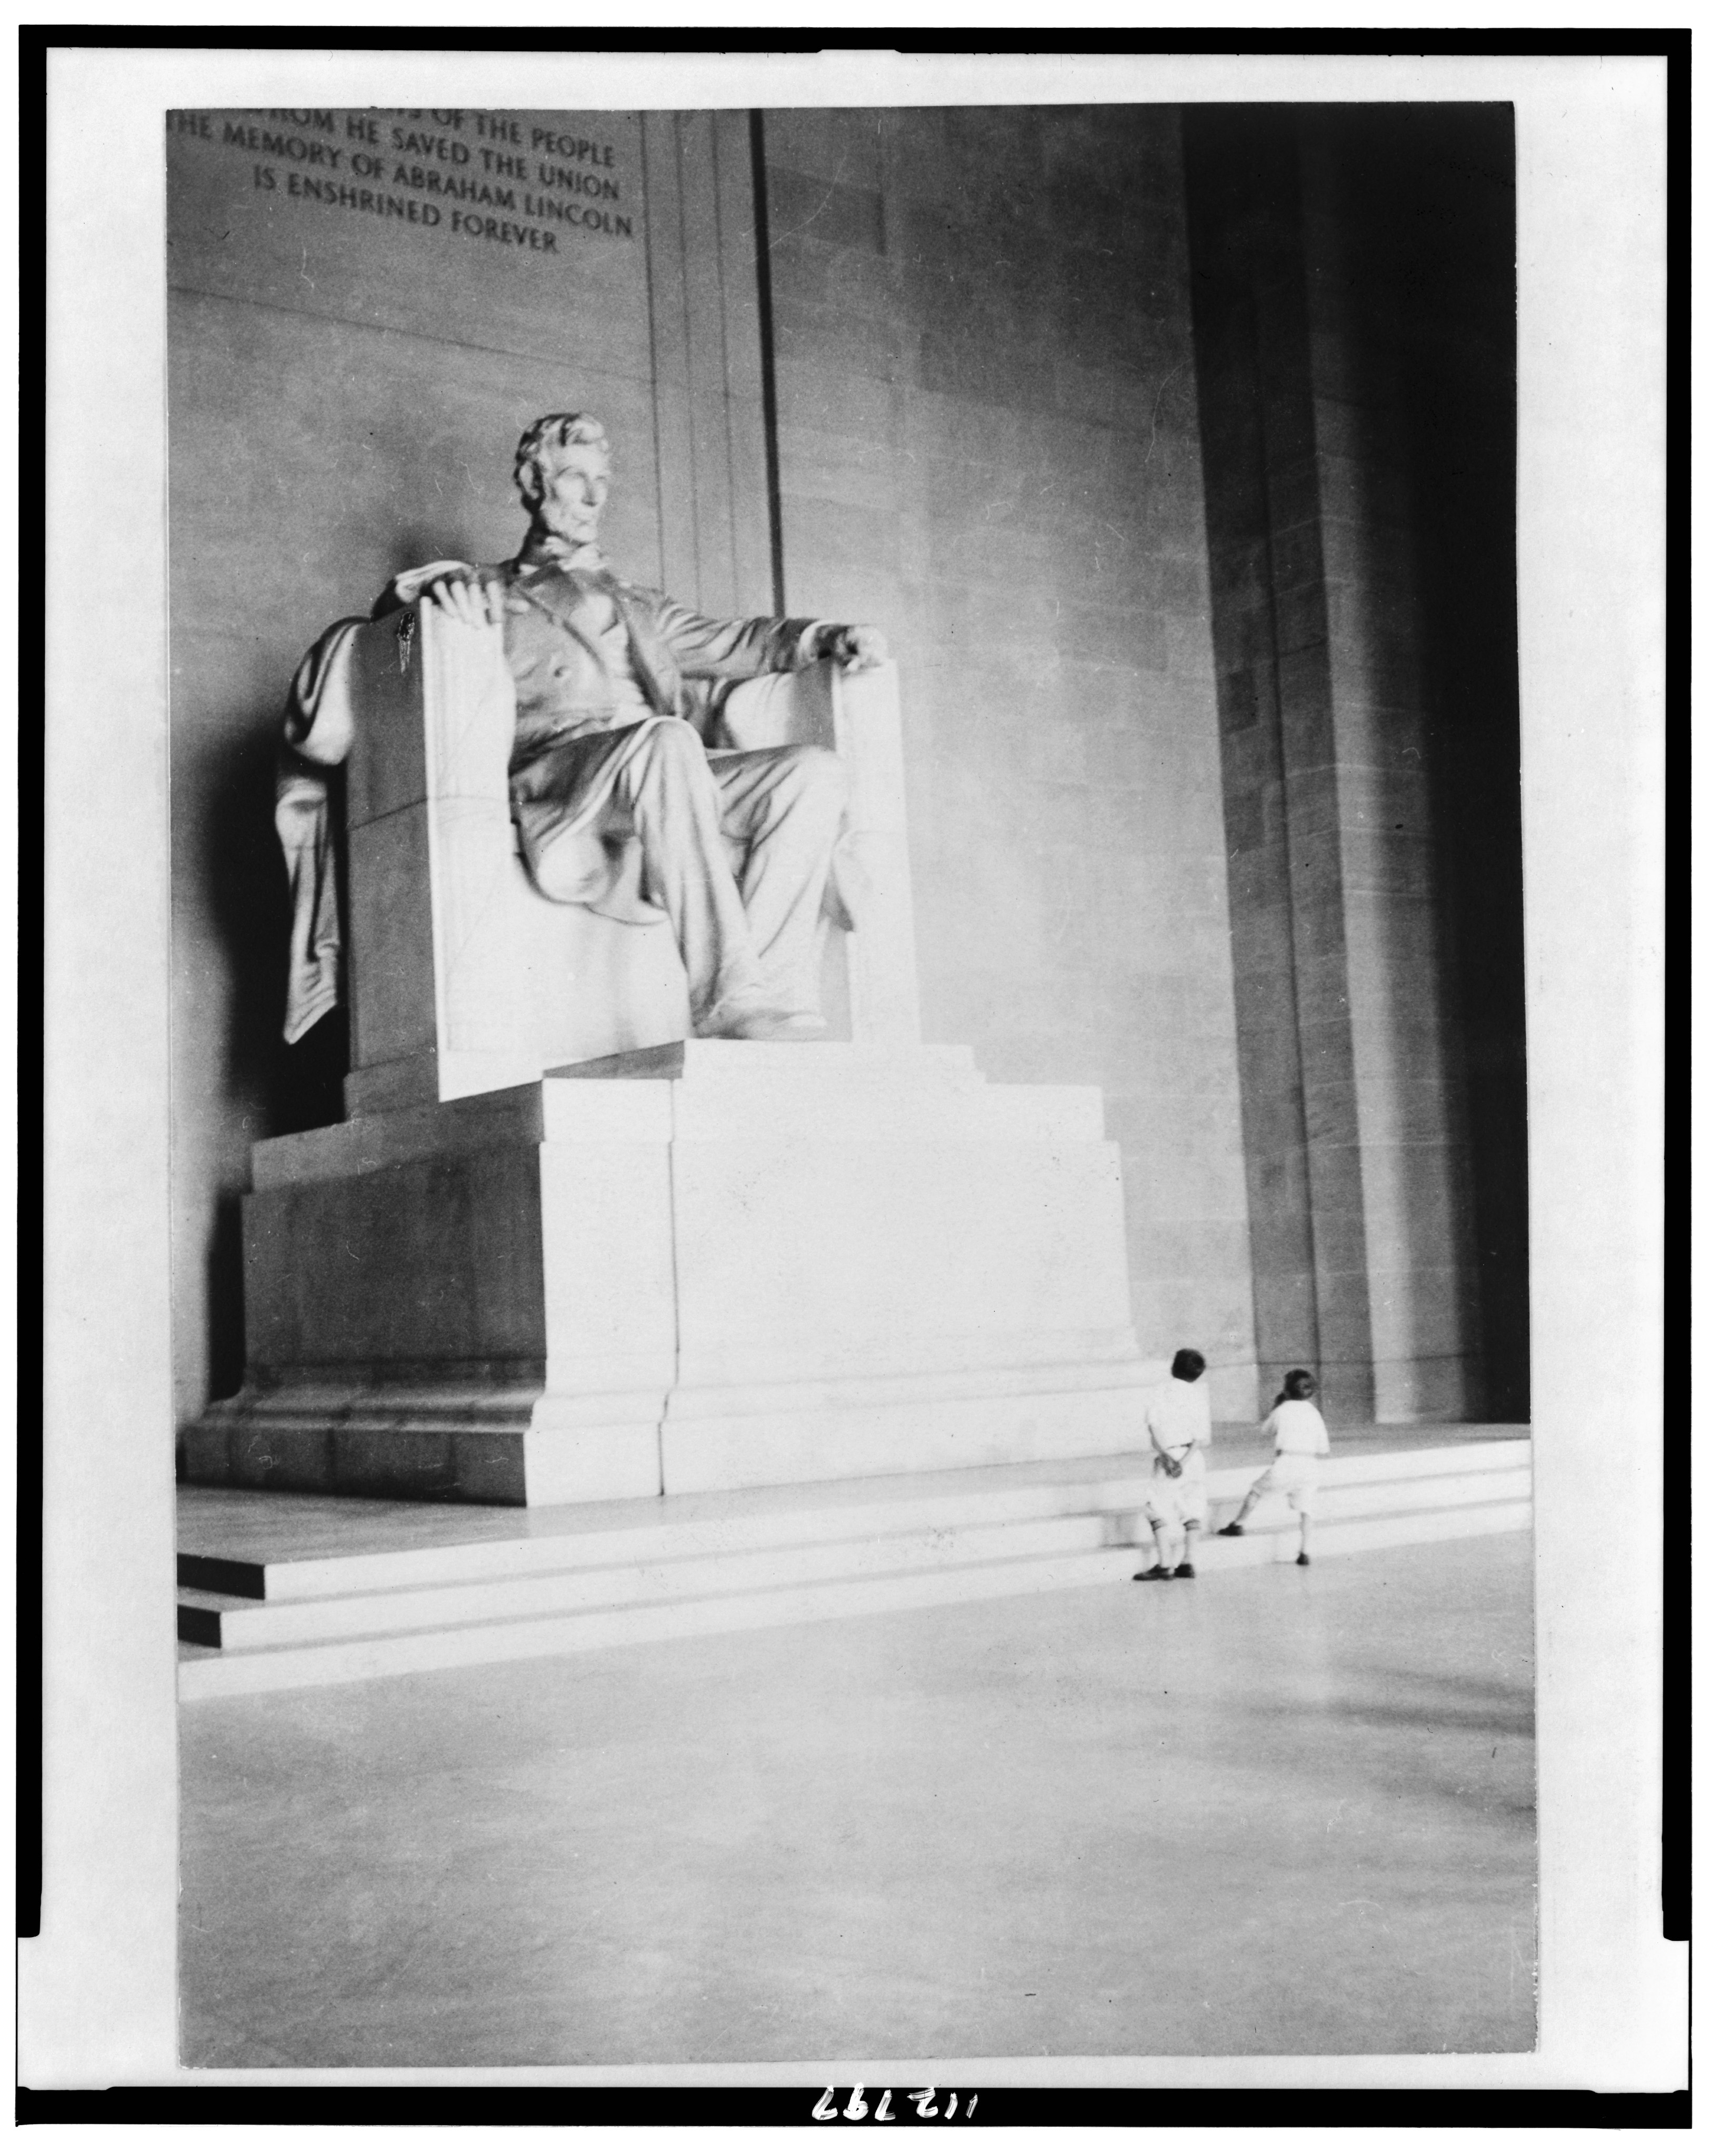 Statue of Abraham Lincoln in the Lincoln Memorial, Washington, D.C. LCCN95501366 - Title: Statue of Abraham Lincoln in the Lincoln Memorial, Washington, D.C.
Abstract/medium: 1 photographic print.